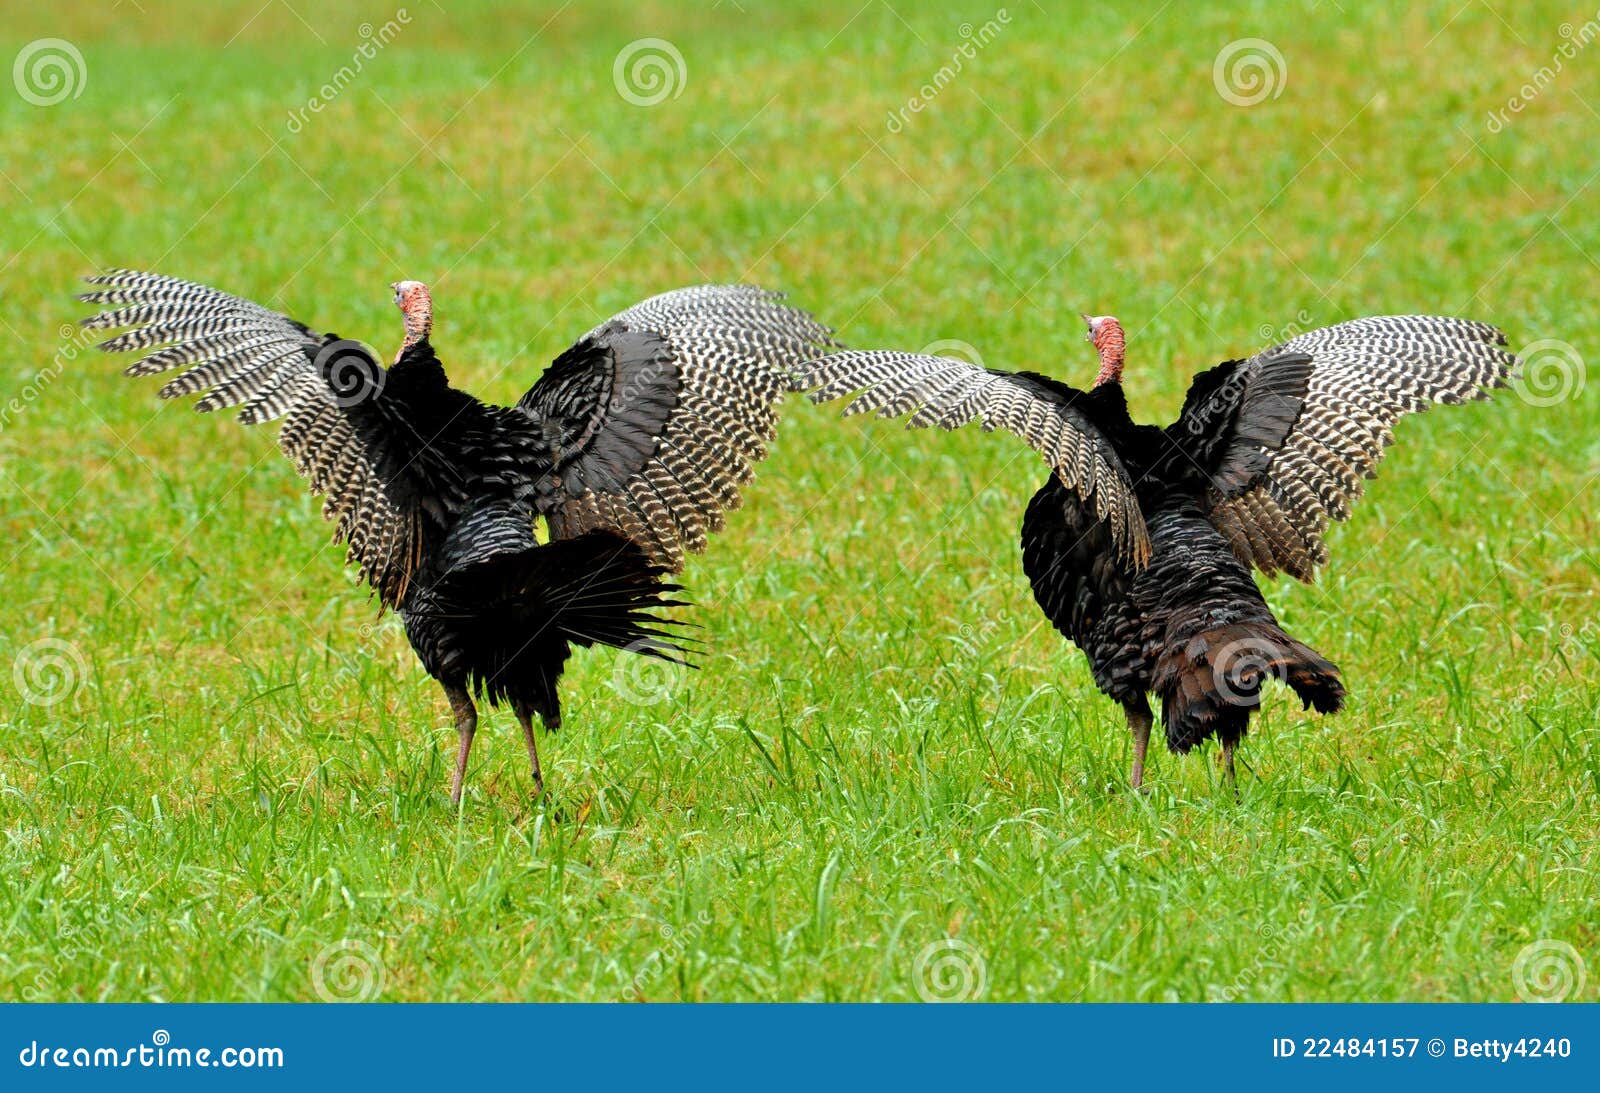 turkeys spreading their feathers and strutting